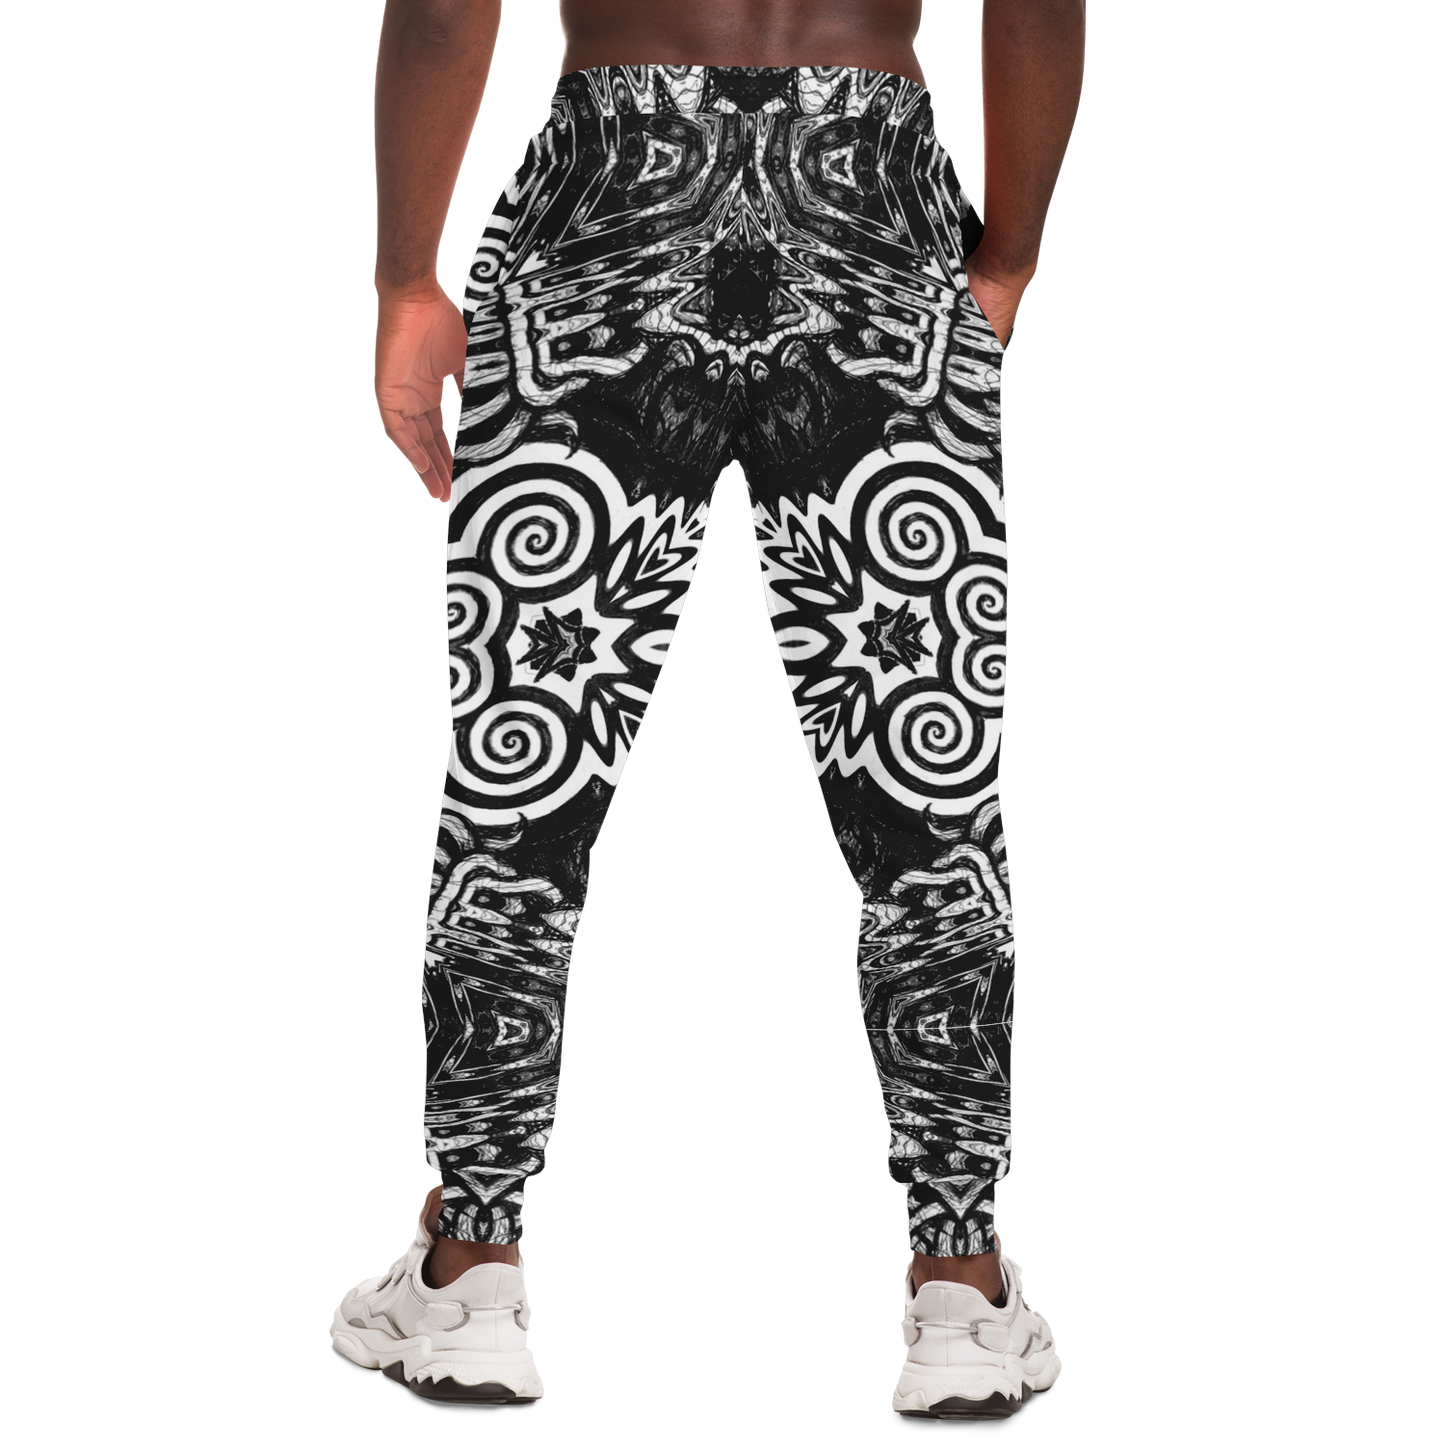 Madness in Black and White Joggers